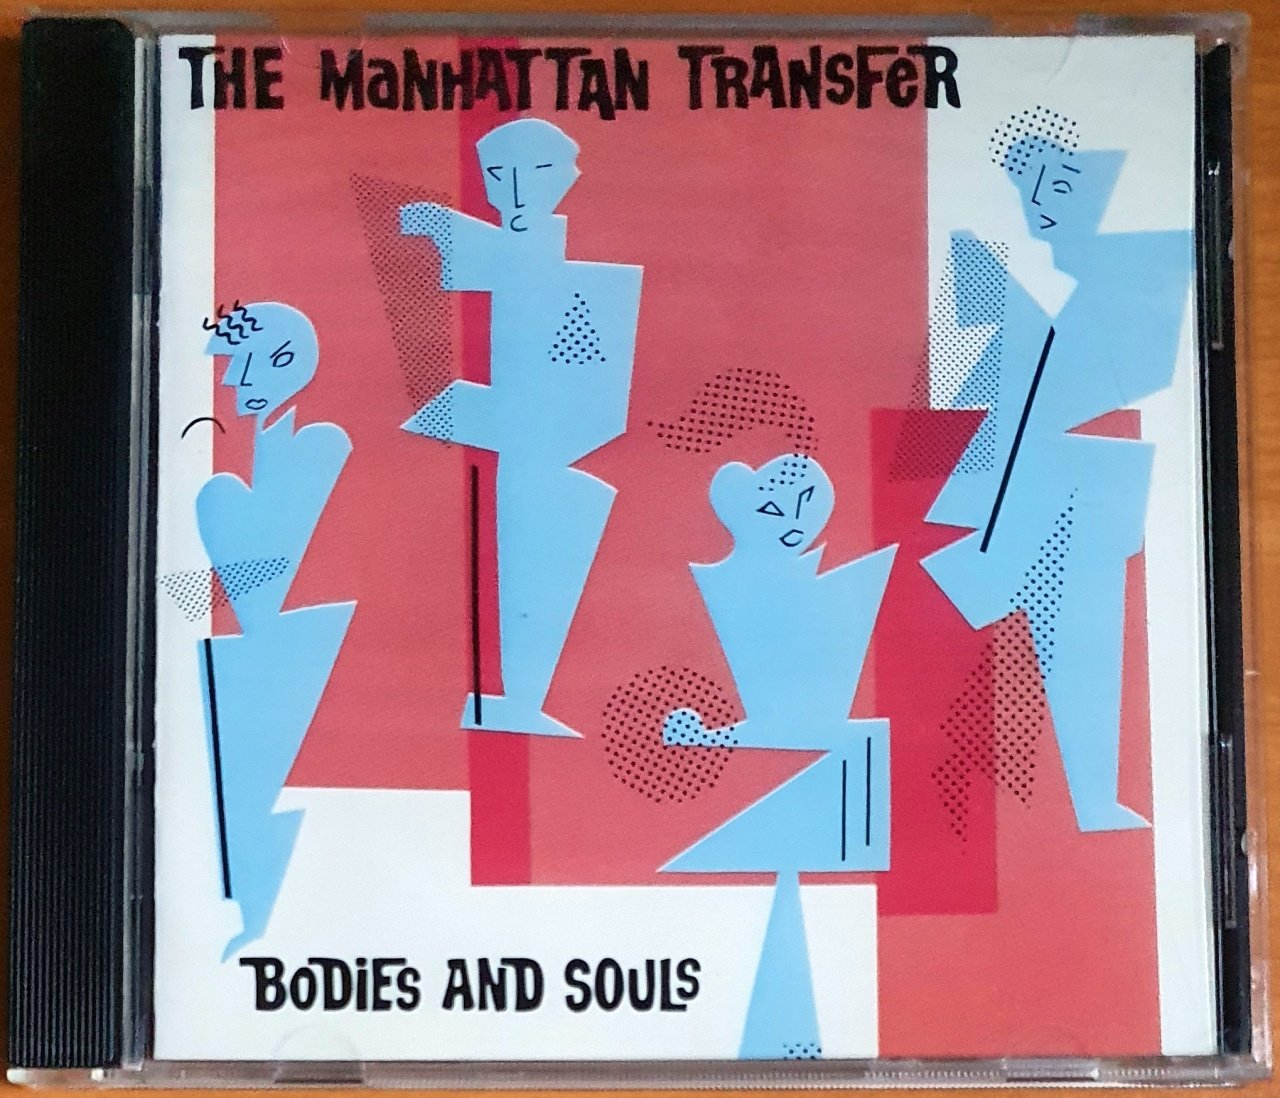 THE MANHATTAN TRANSFER - BODIES AND SOULS (1983) - CD 2.EL